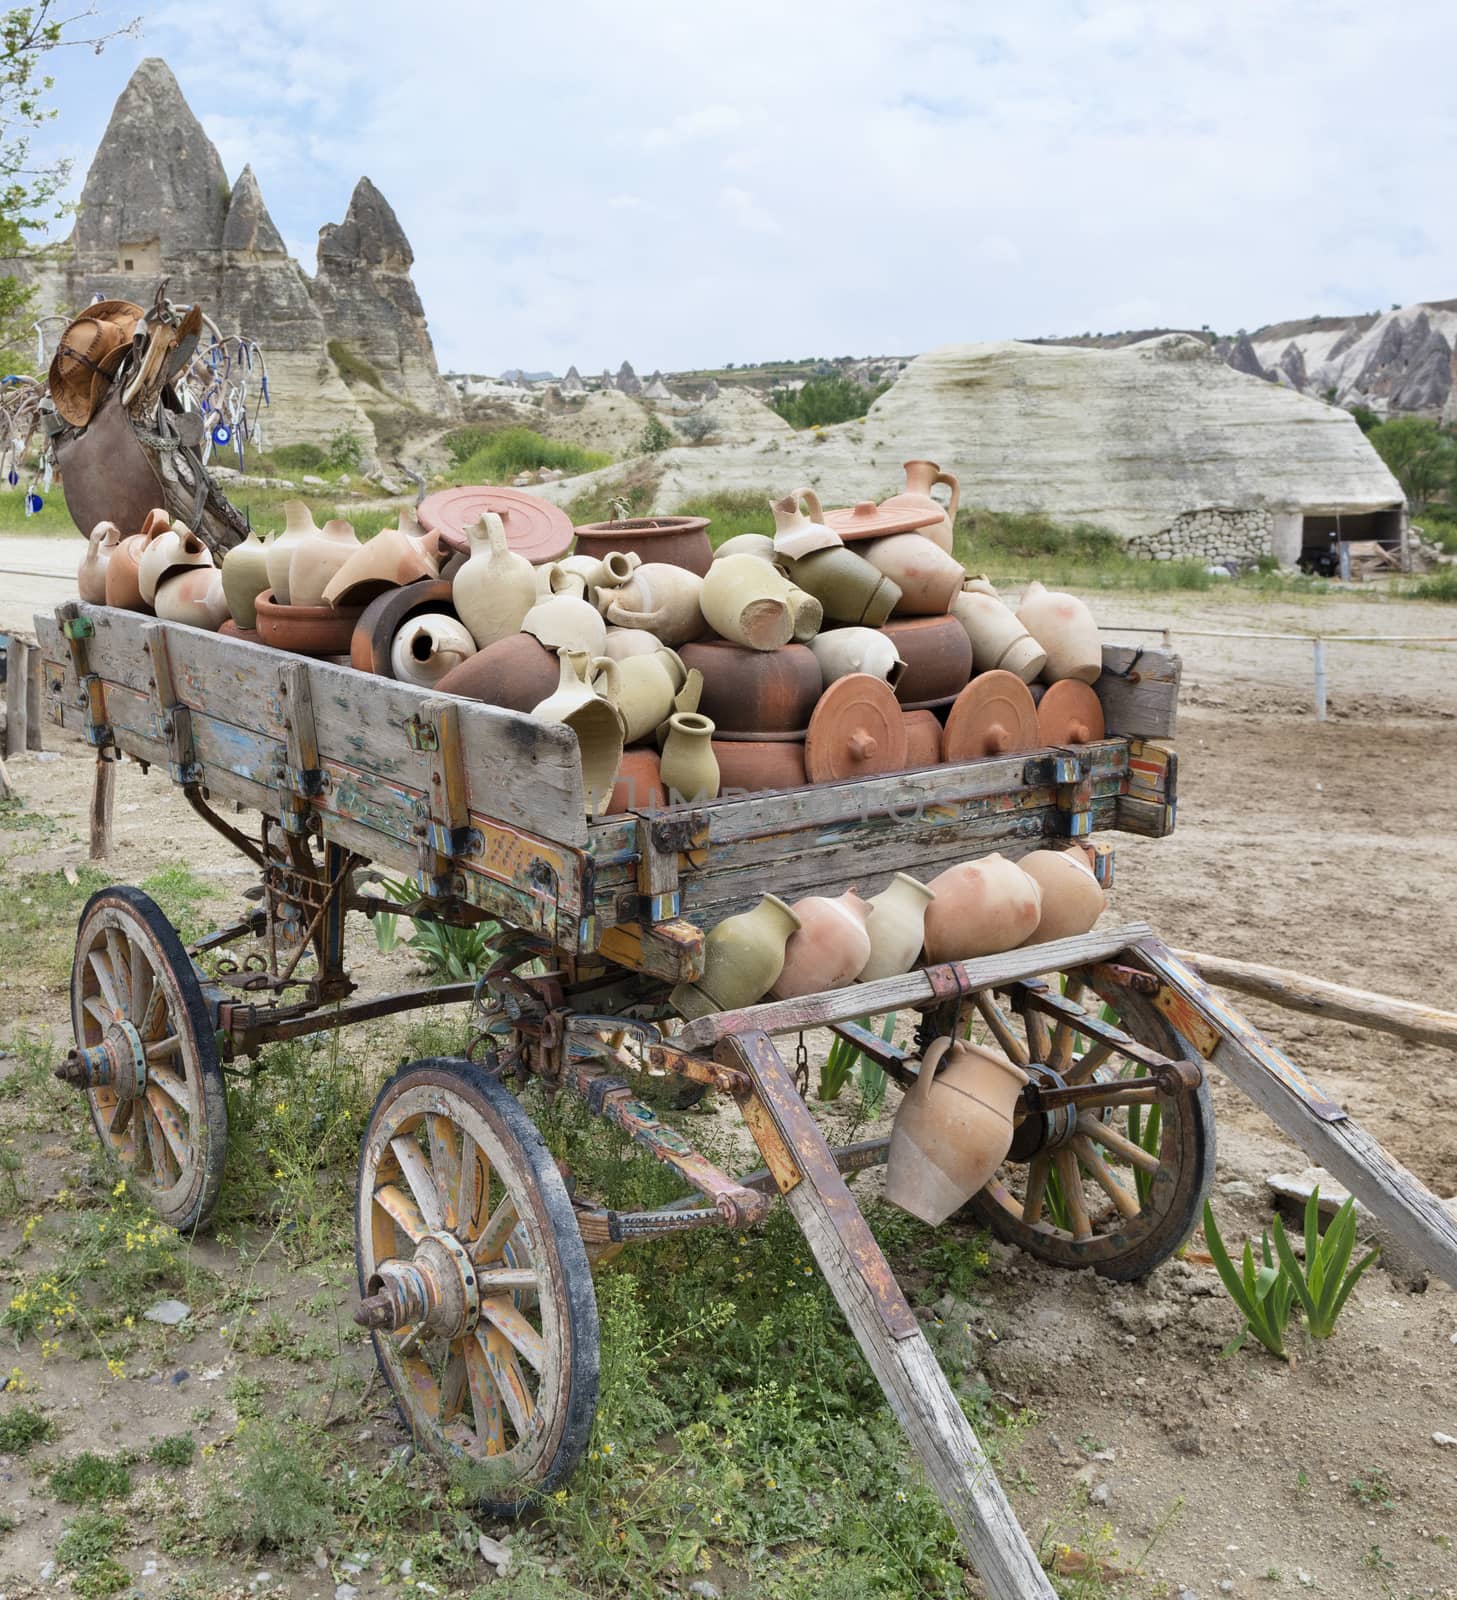 On an old wooden cart, a pile of clay jugs and pots by Sergii